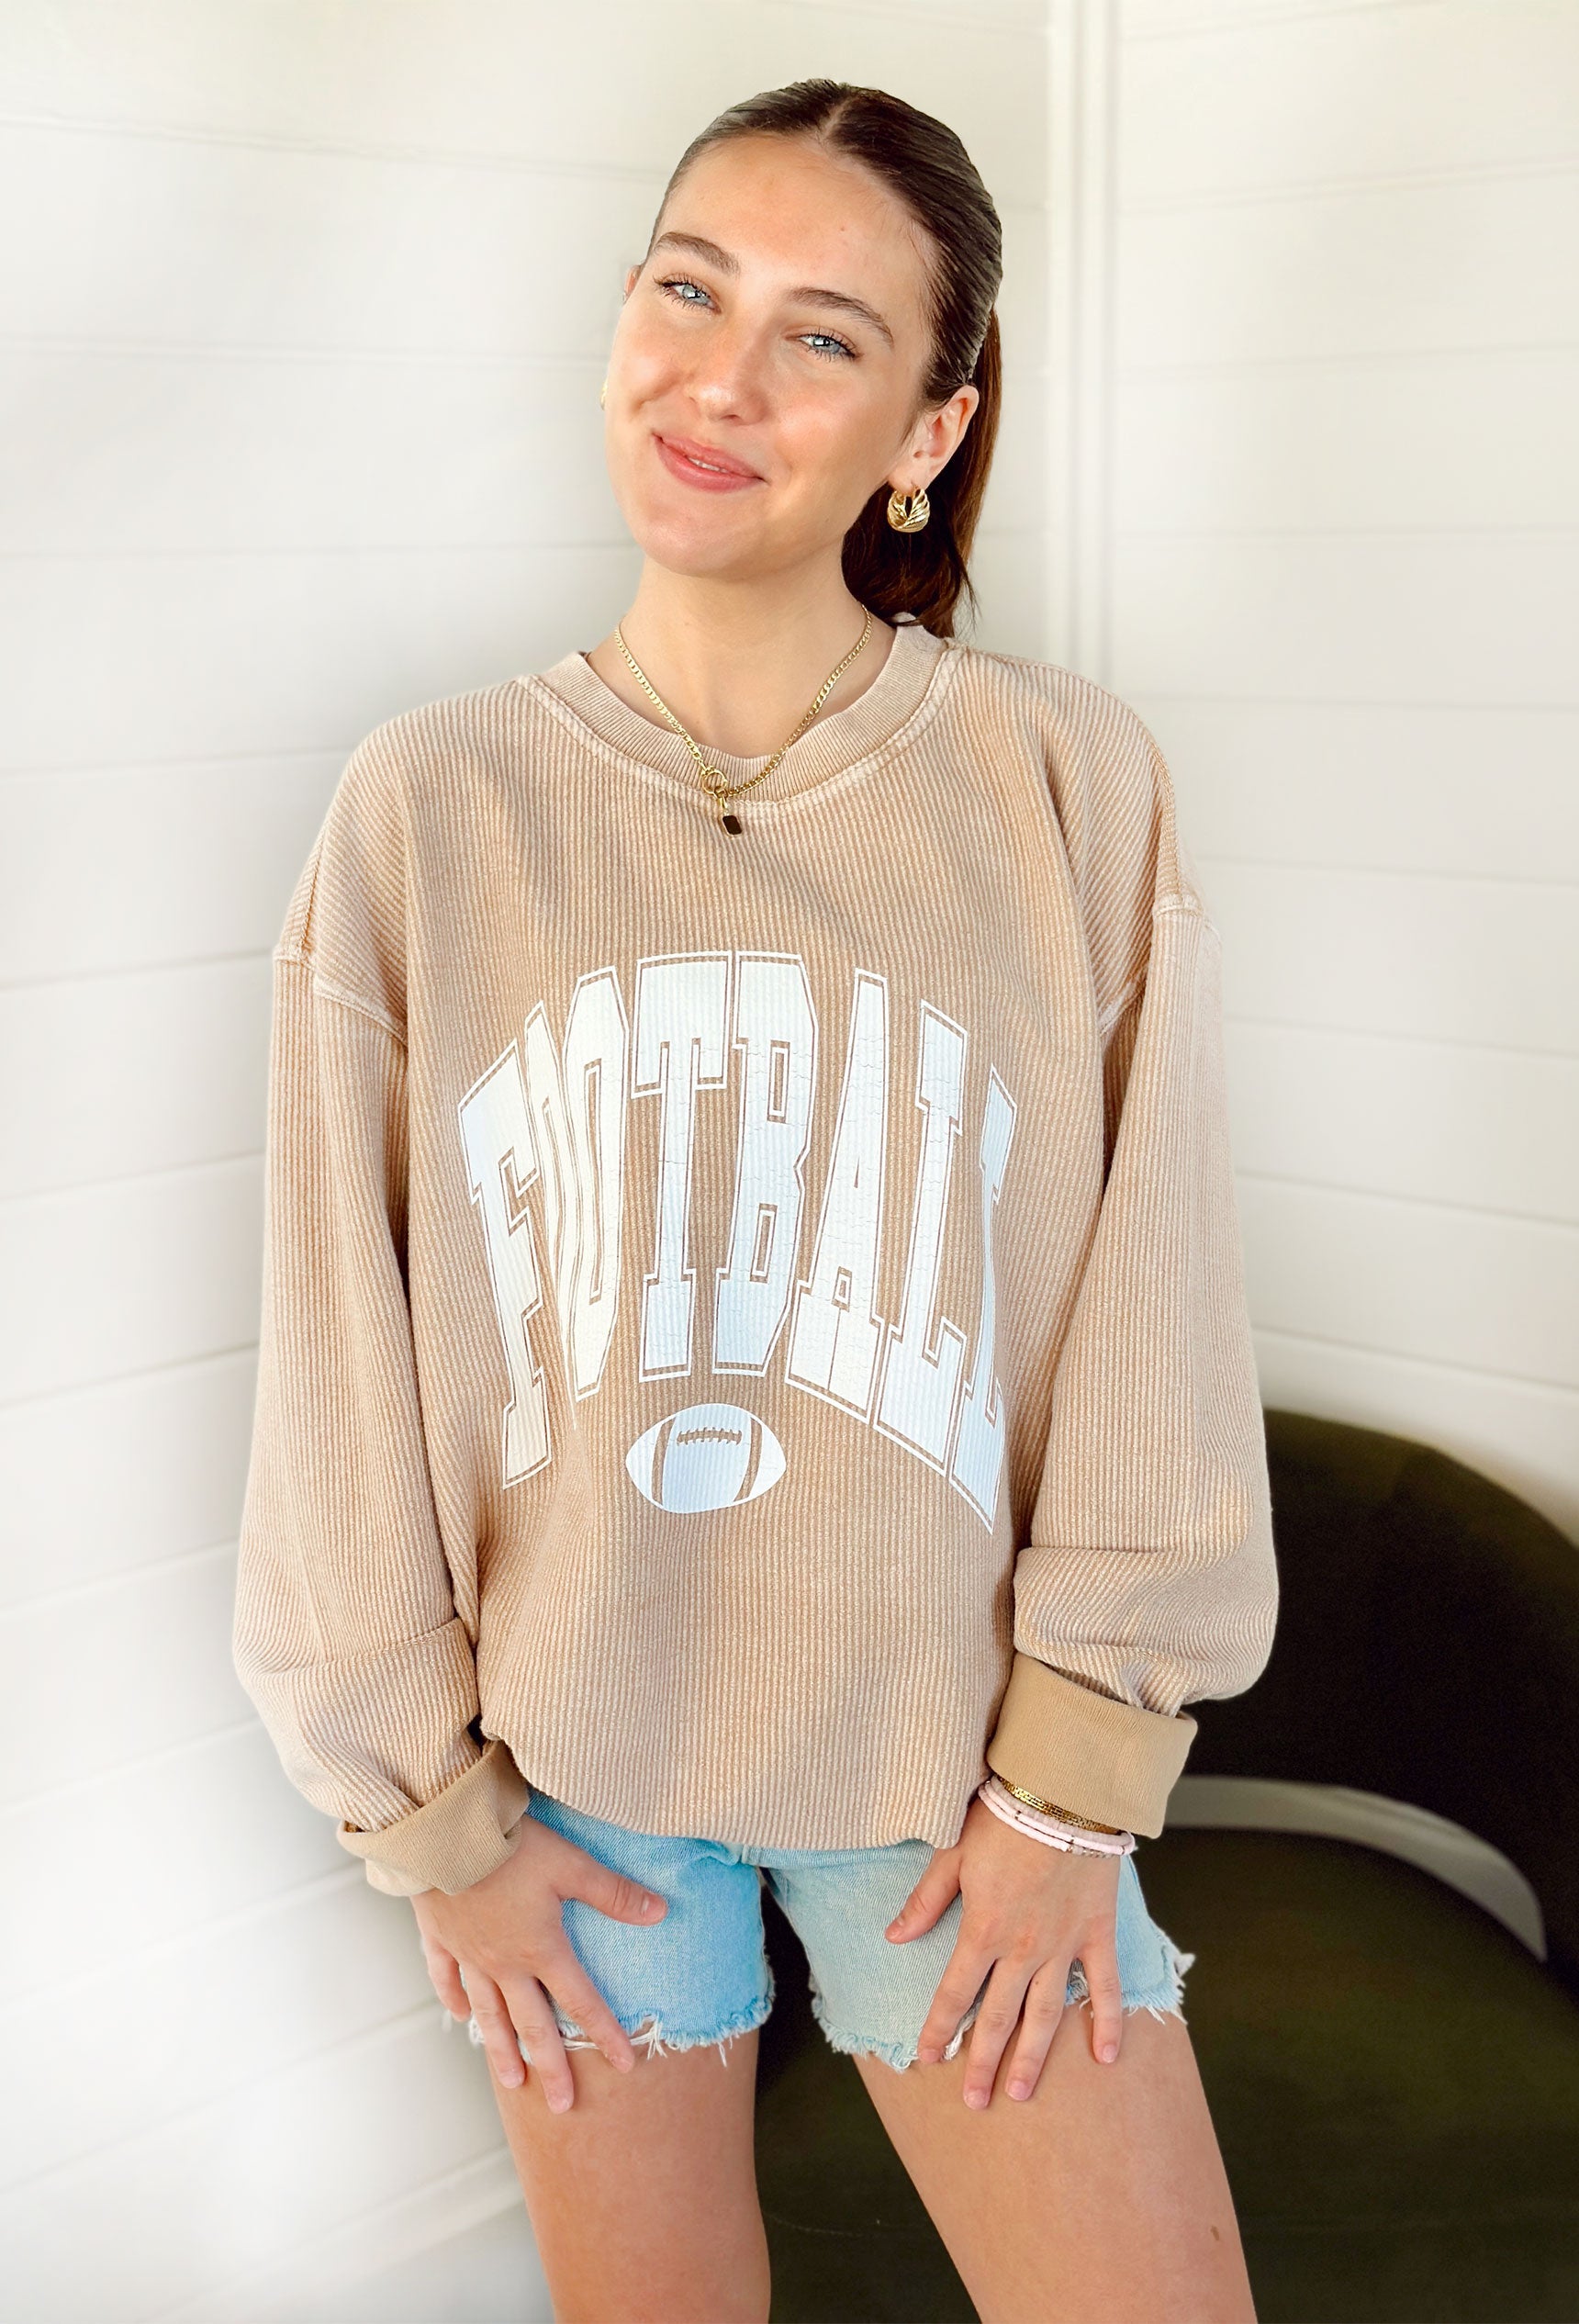 Charlie Southern: Football Corded Crew, beige corded crewneck with "football" in white varsity font and a football graphic in white